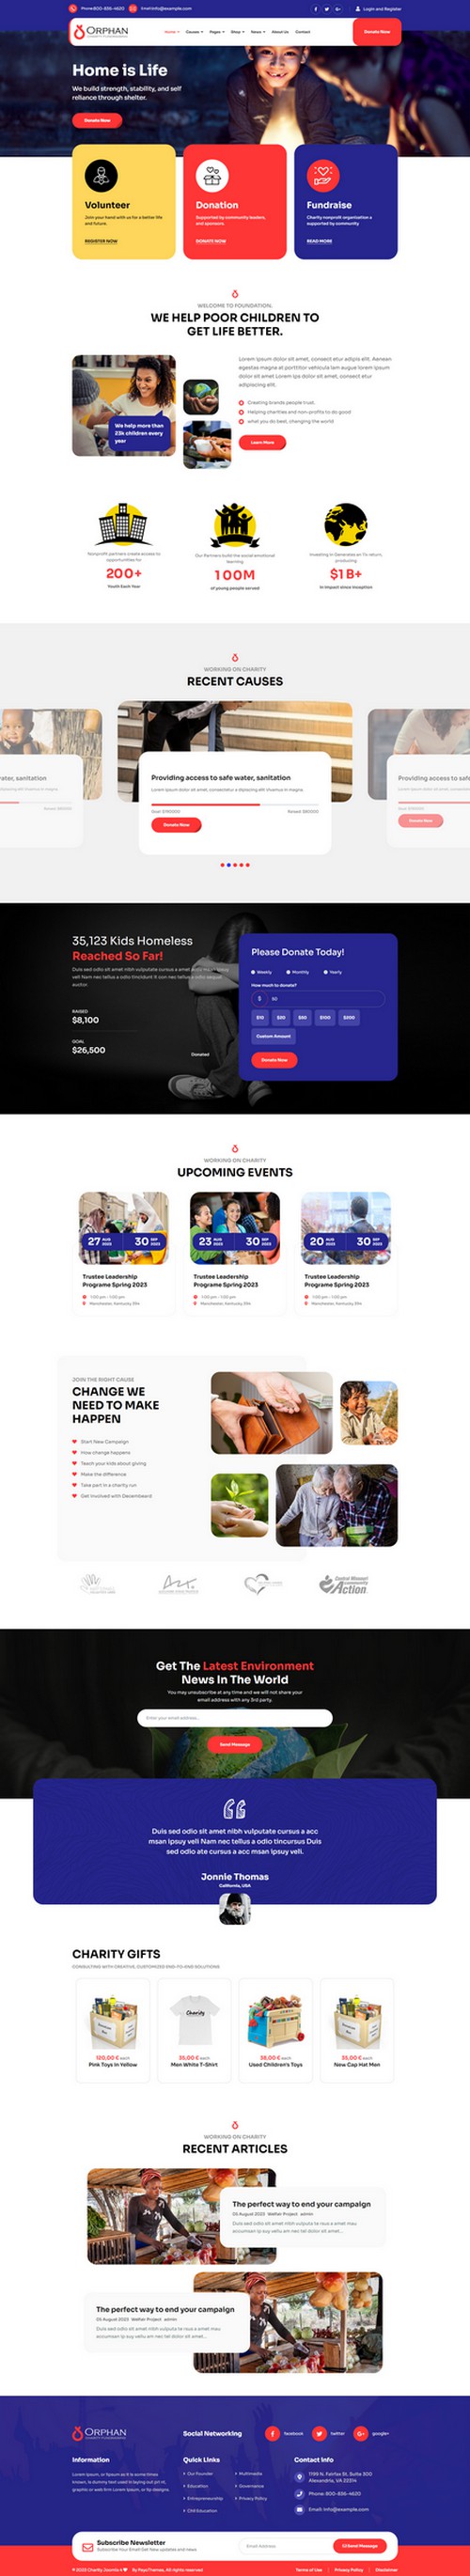 Orphan - Charity and Fundraising Non-Profit Joomla Template